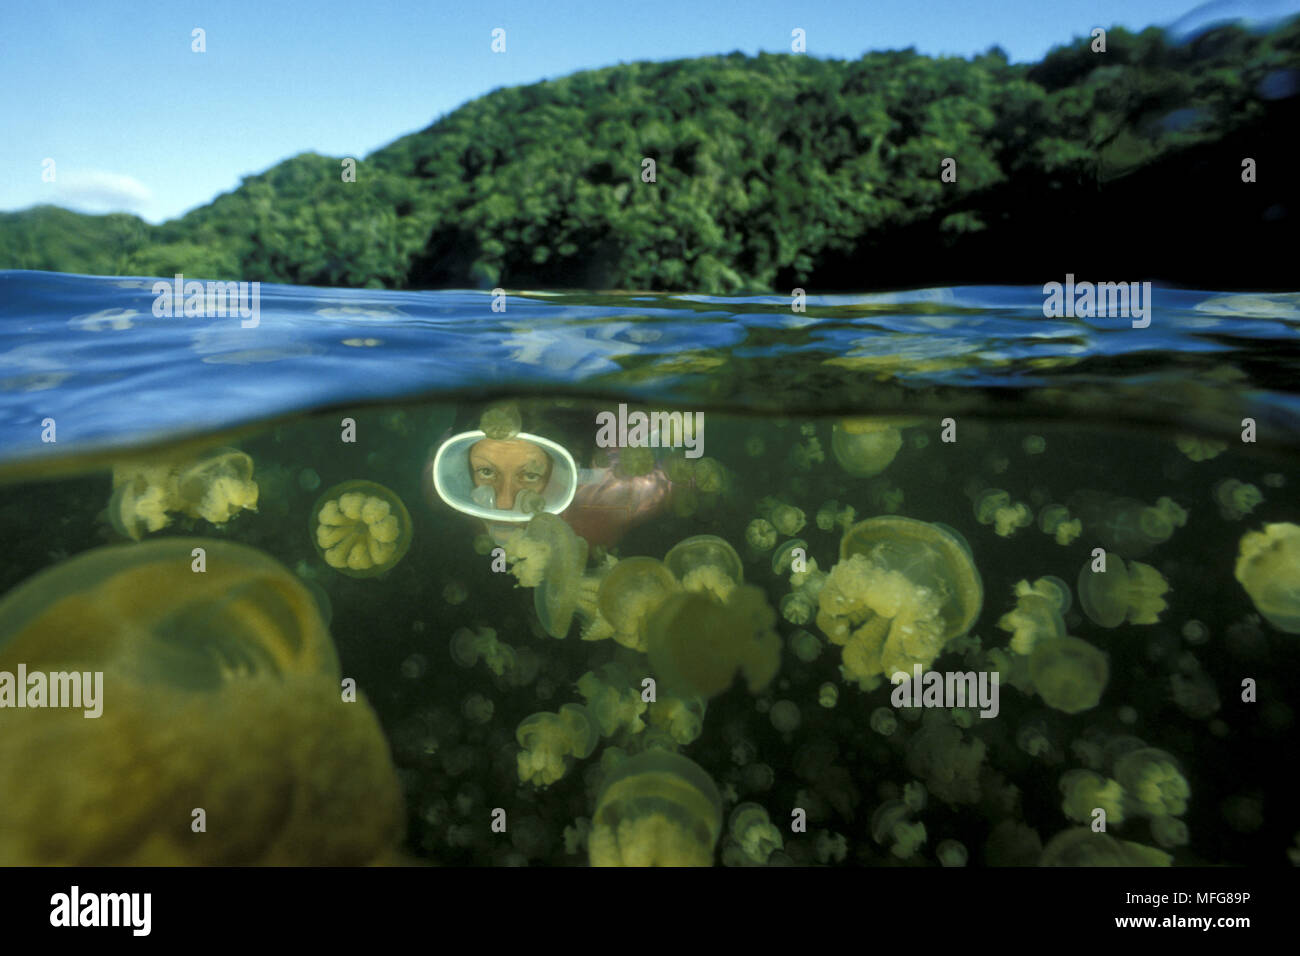 Snorkeler with jellyfish, Mastigias sp., due to their isolation, these jellyfish have lost their ability to sting, Jellyfish Lake Palau (Belau), Micro Stock Photo